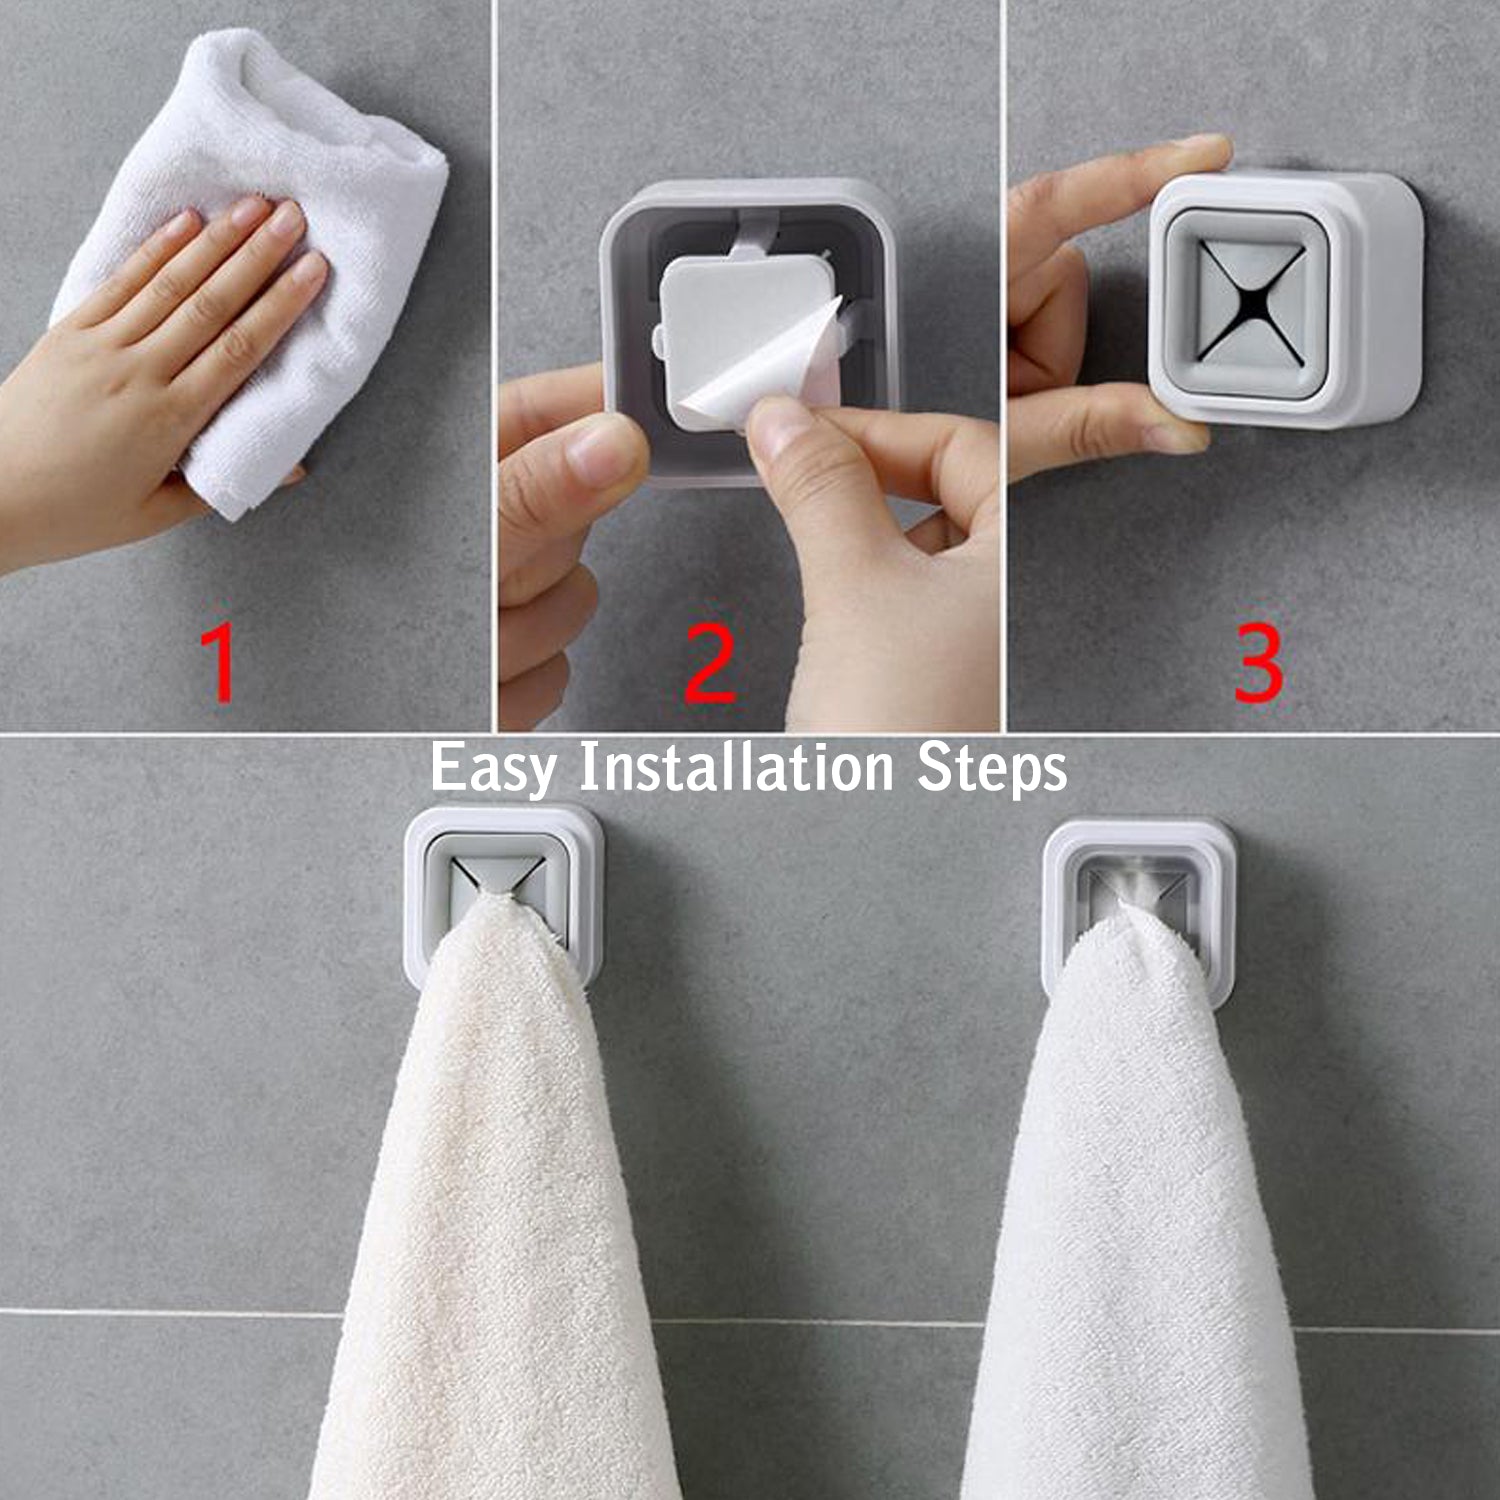 6146 4 Pc Towel Holder mostly used in all kinds of bathroom purposes for hanging and placing towels for easy take-in and take-out purposes. DeoDap